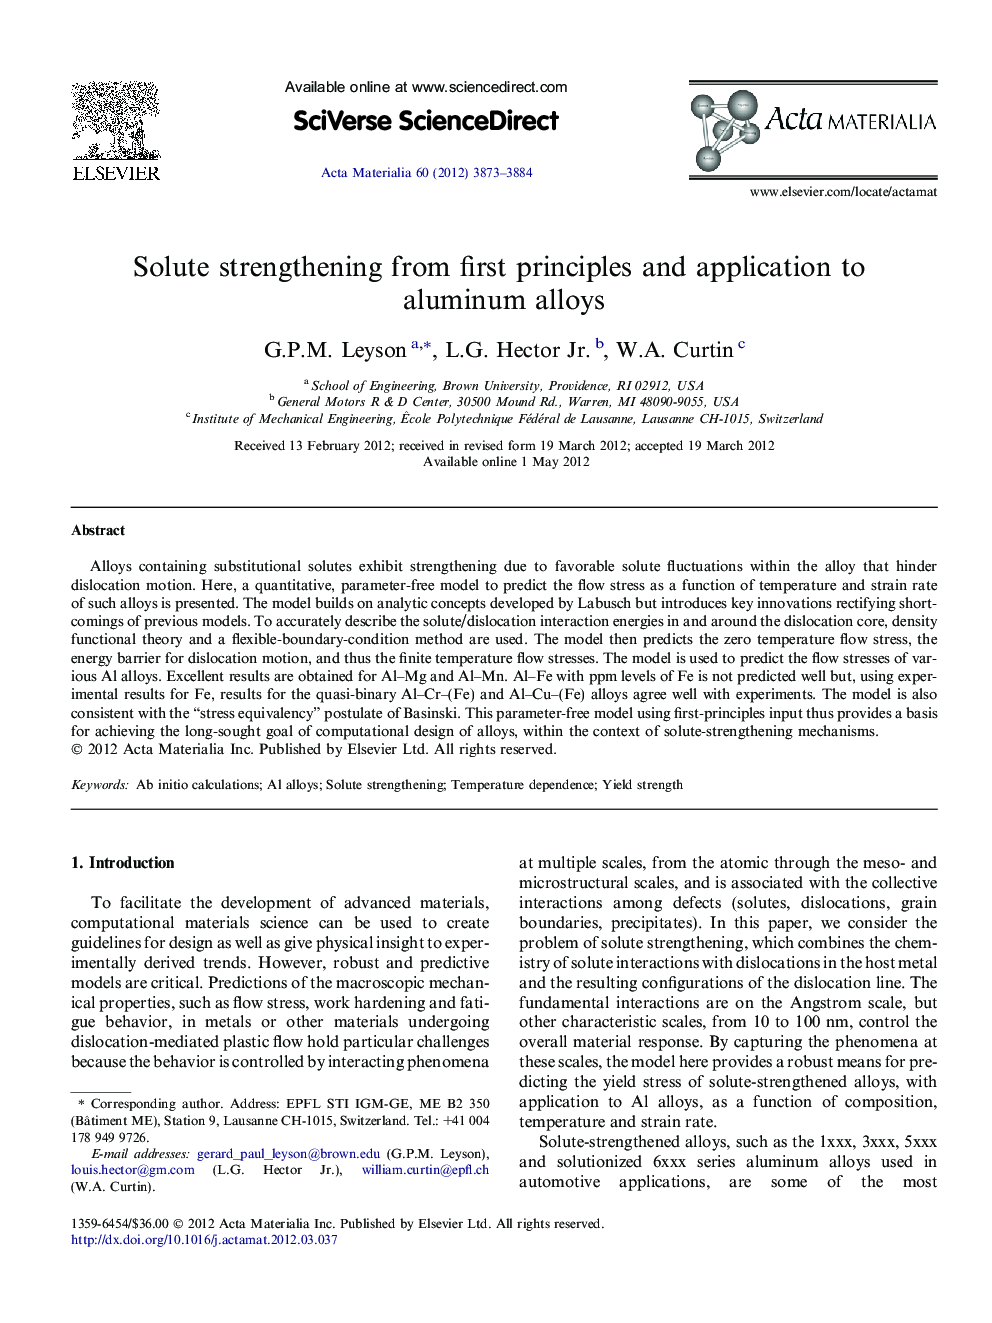 Solute strengthening from first principles and application to aluminum alloys